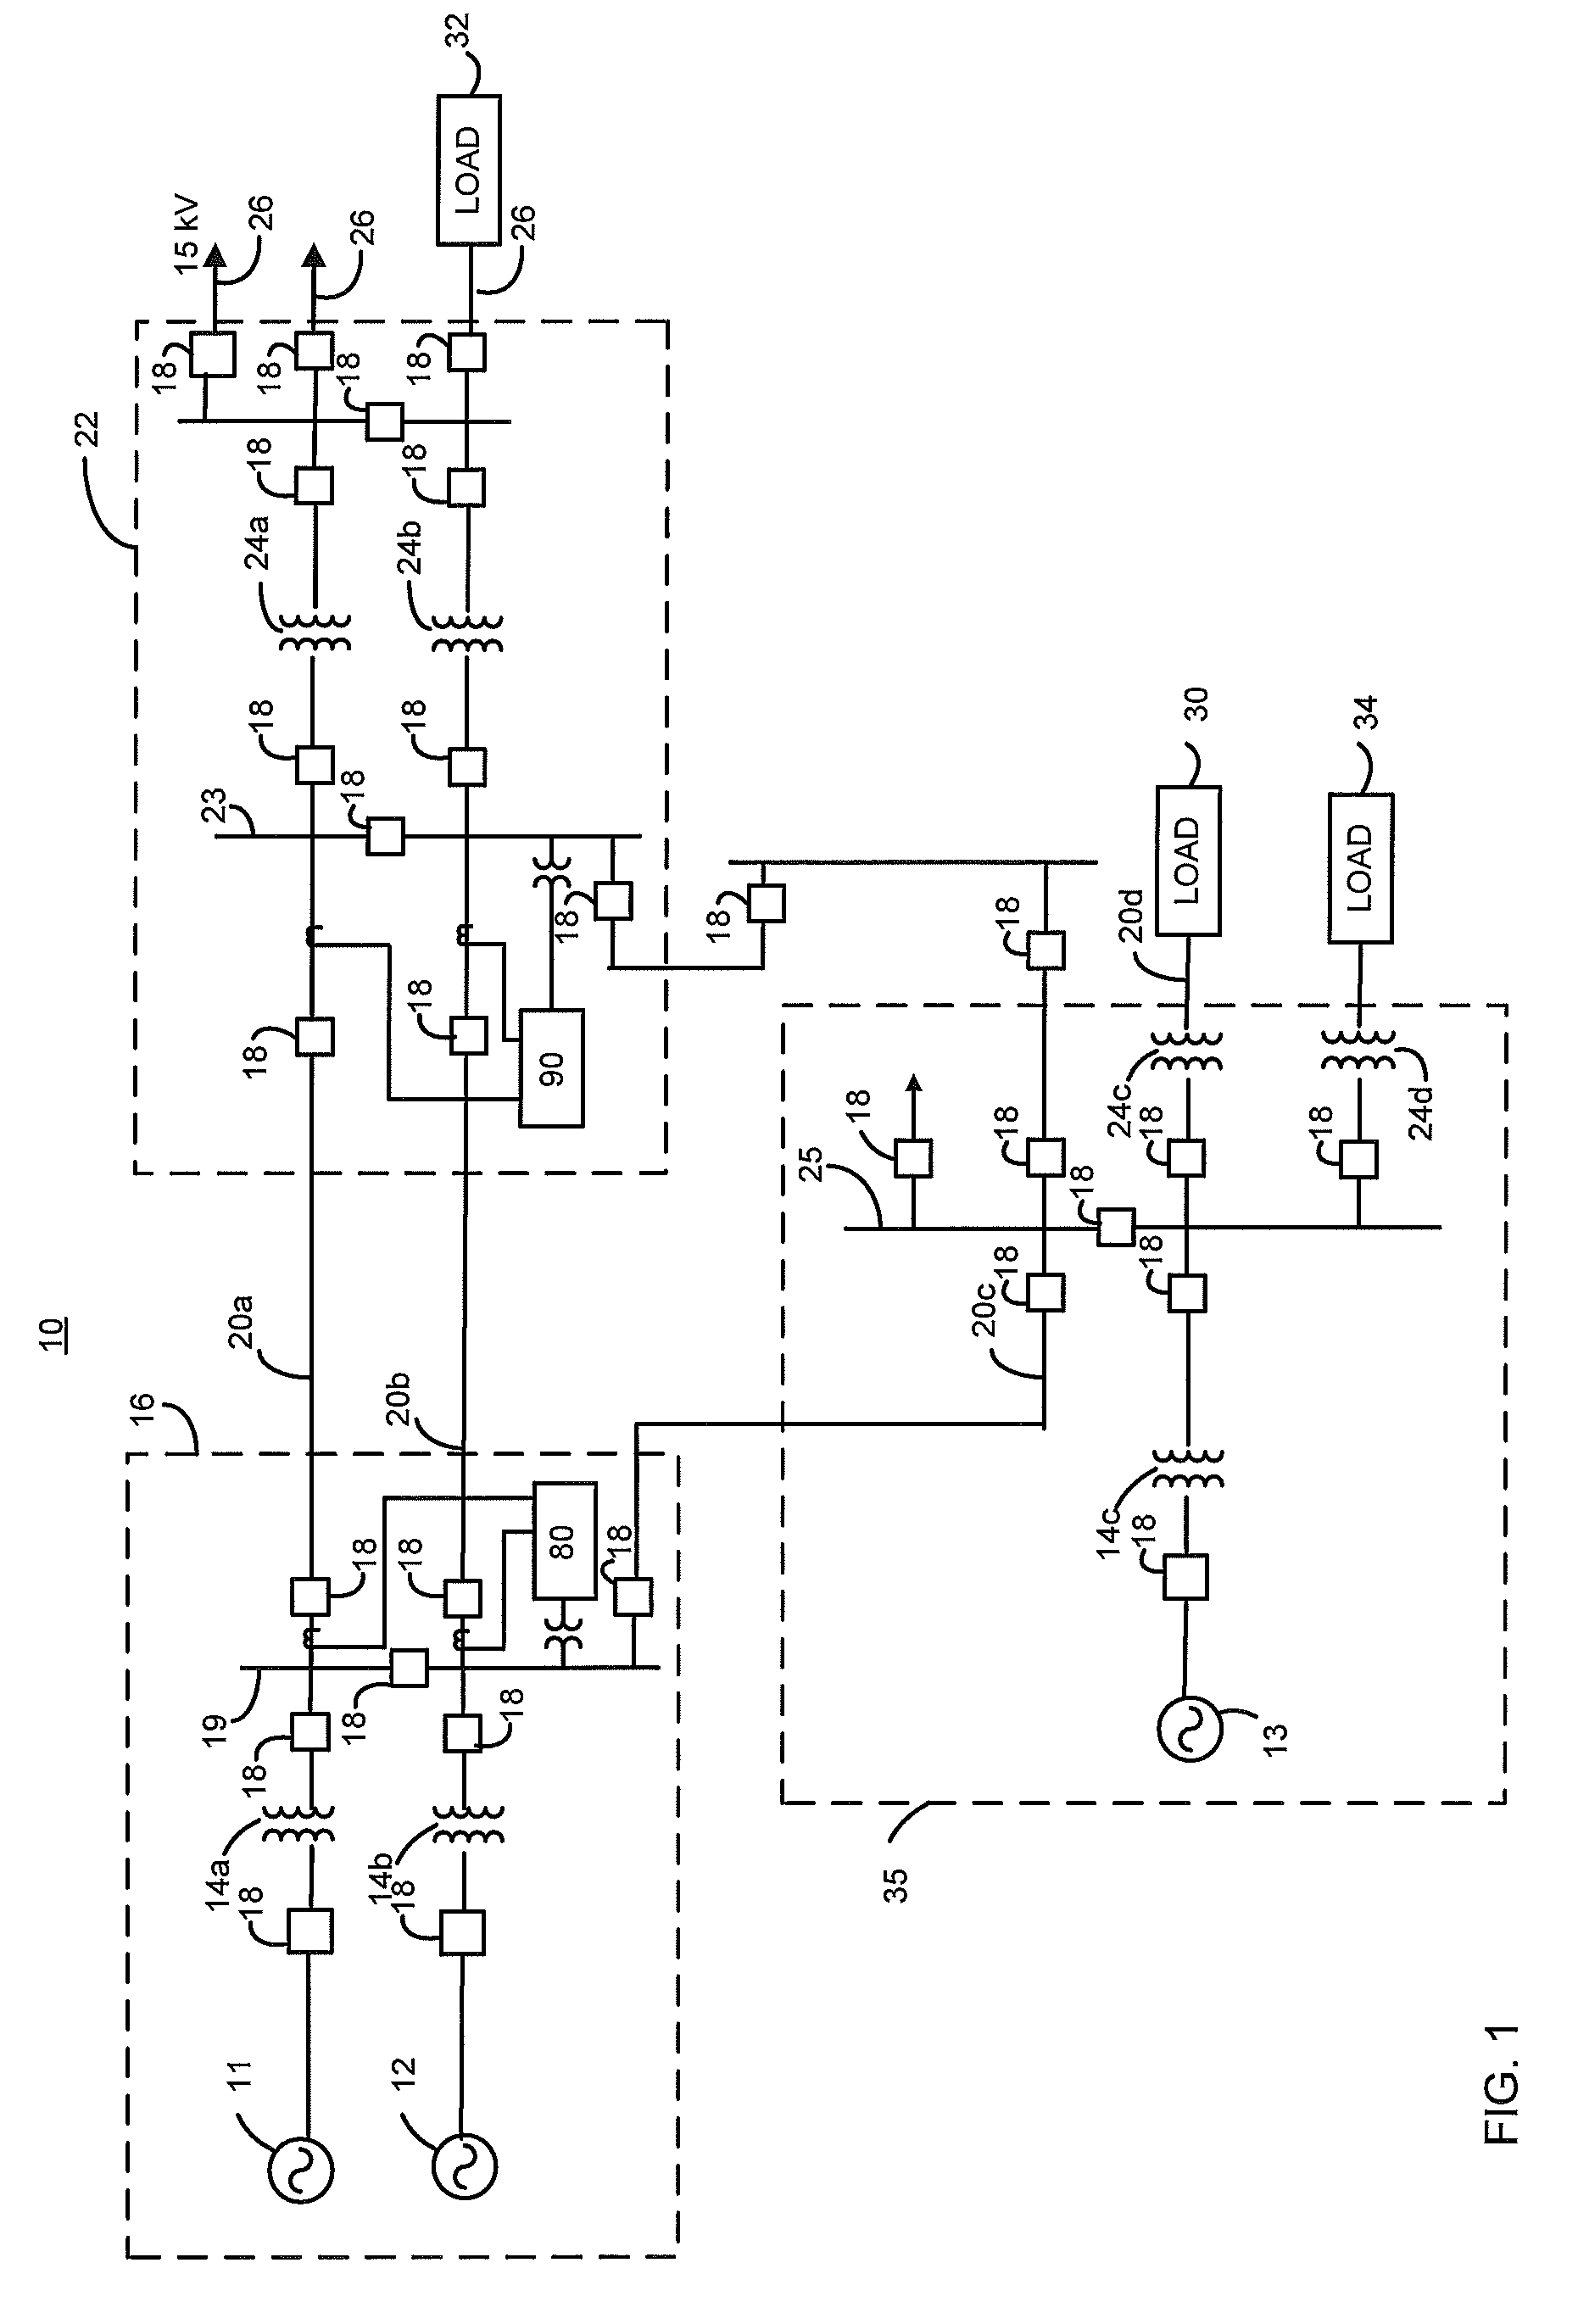 Apparatus, method, and system for wide-area protection and control using power system data having a time component associated therewith